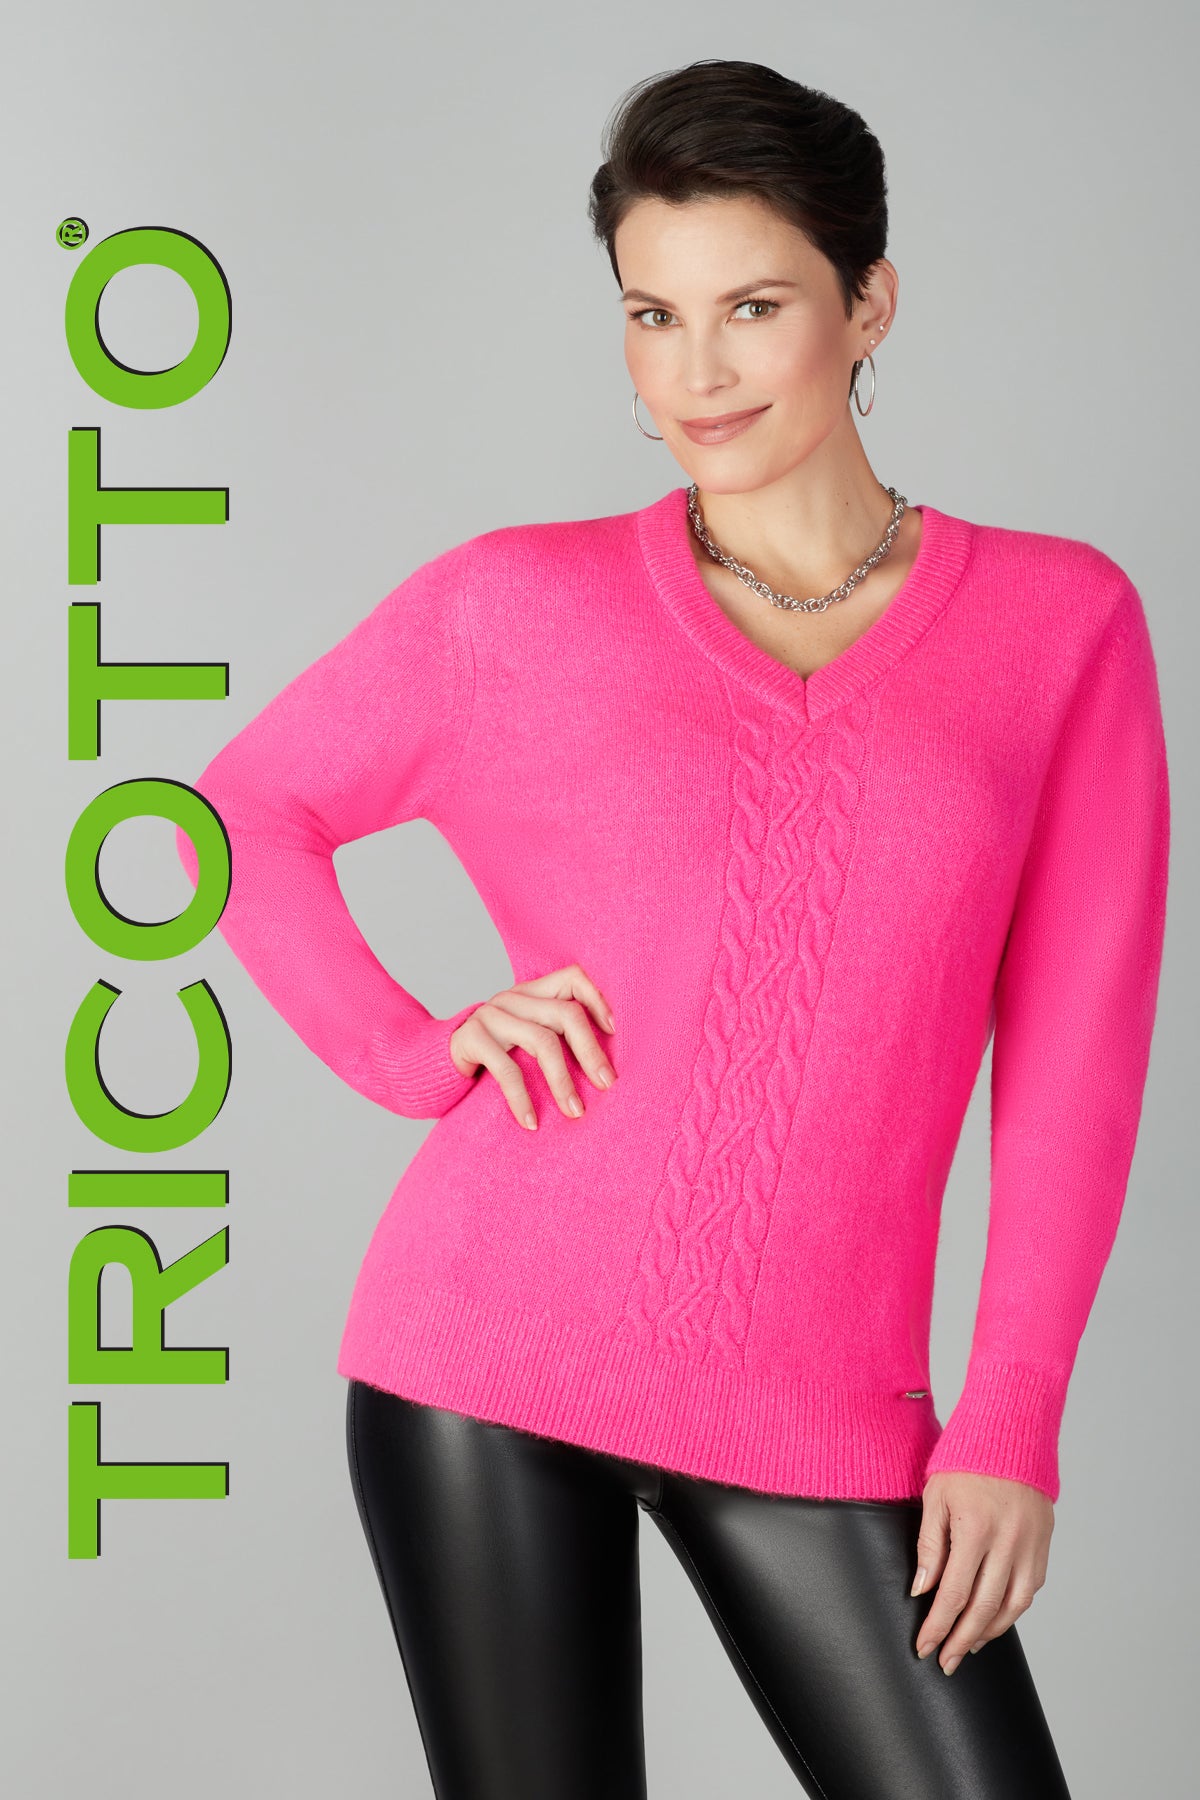 Tricotto Sweaters-Buy Tricotto Sweaters Online-Online Sweater Shop-Tricotto Clothing Montreal-Tricotto Pink Sweater-Tricotto Green Sweater